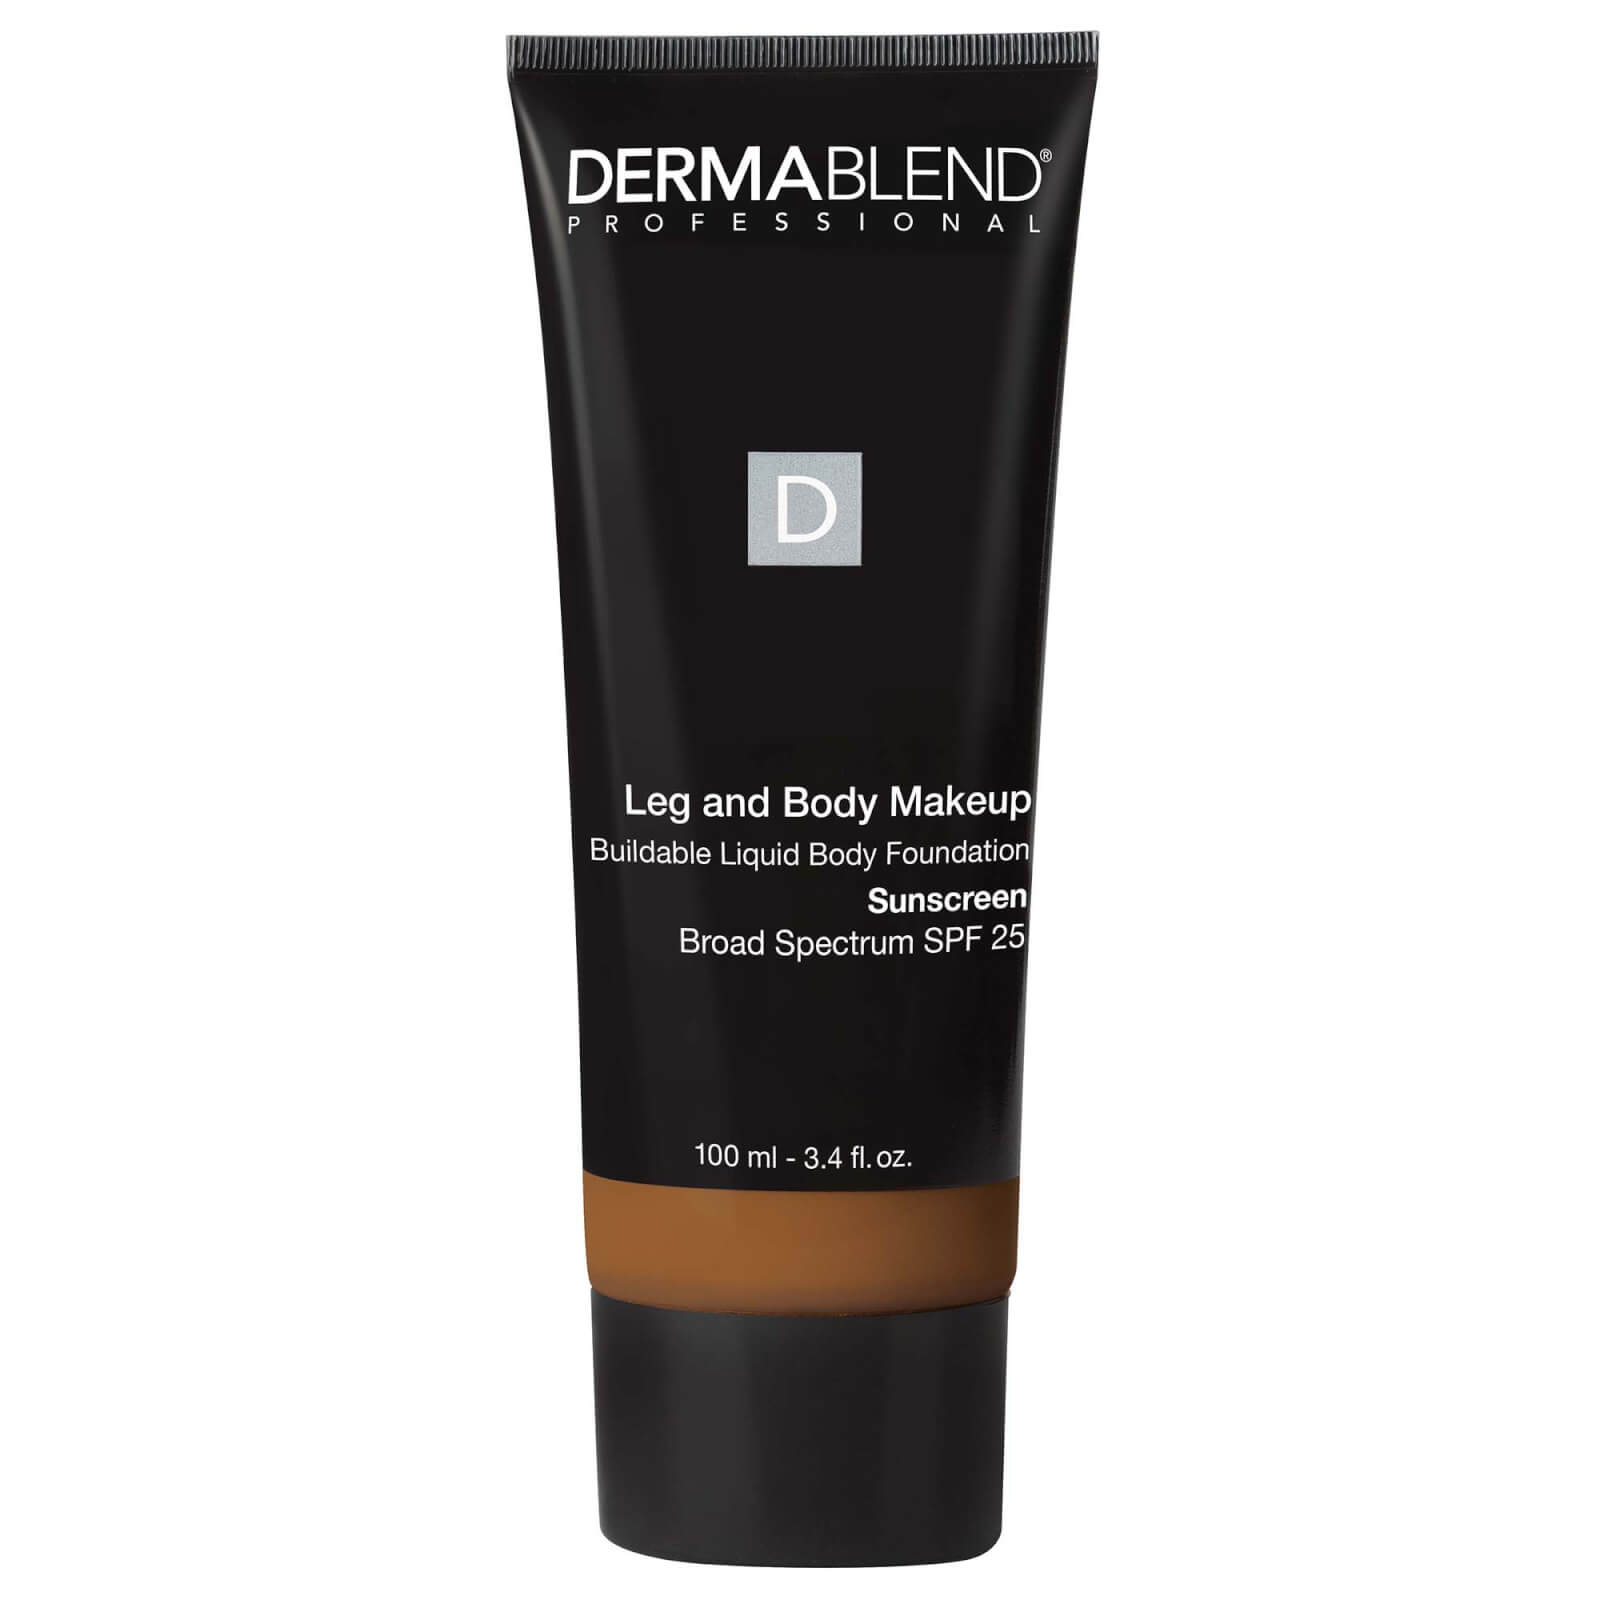 Dermablend Leg And Body Makeup Foundation With Spf 25 (3.4 Fl. Oz.) - 70 Warm In 70 Warm - Deep Golden